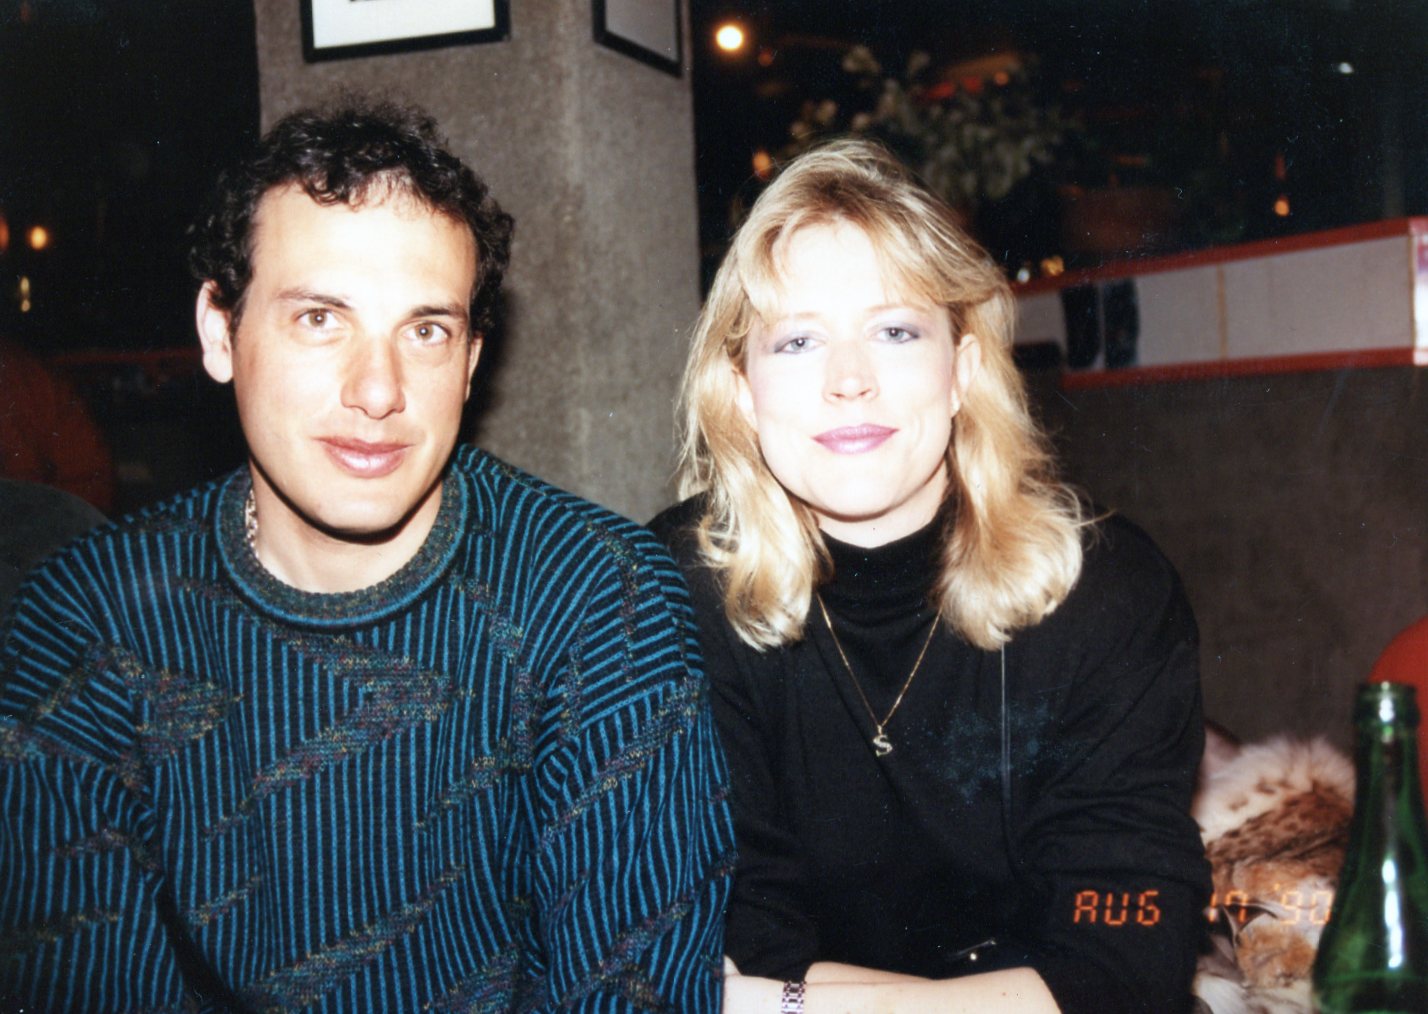 PHOTO: Robert Bierenbaum and Stephanie Youngblood seen here in this August 1990 photo.